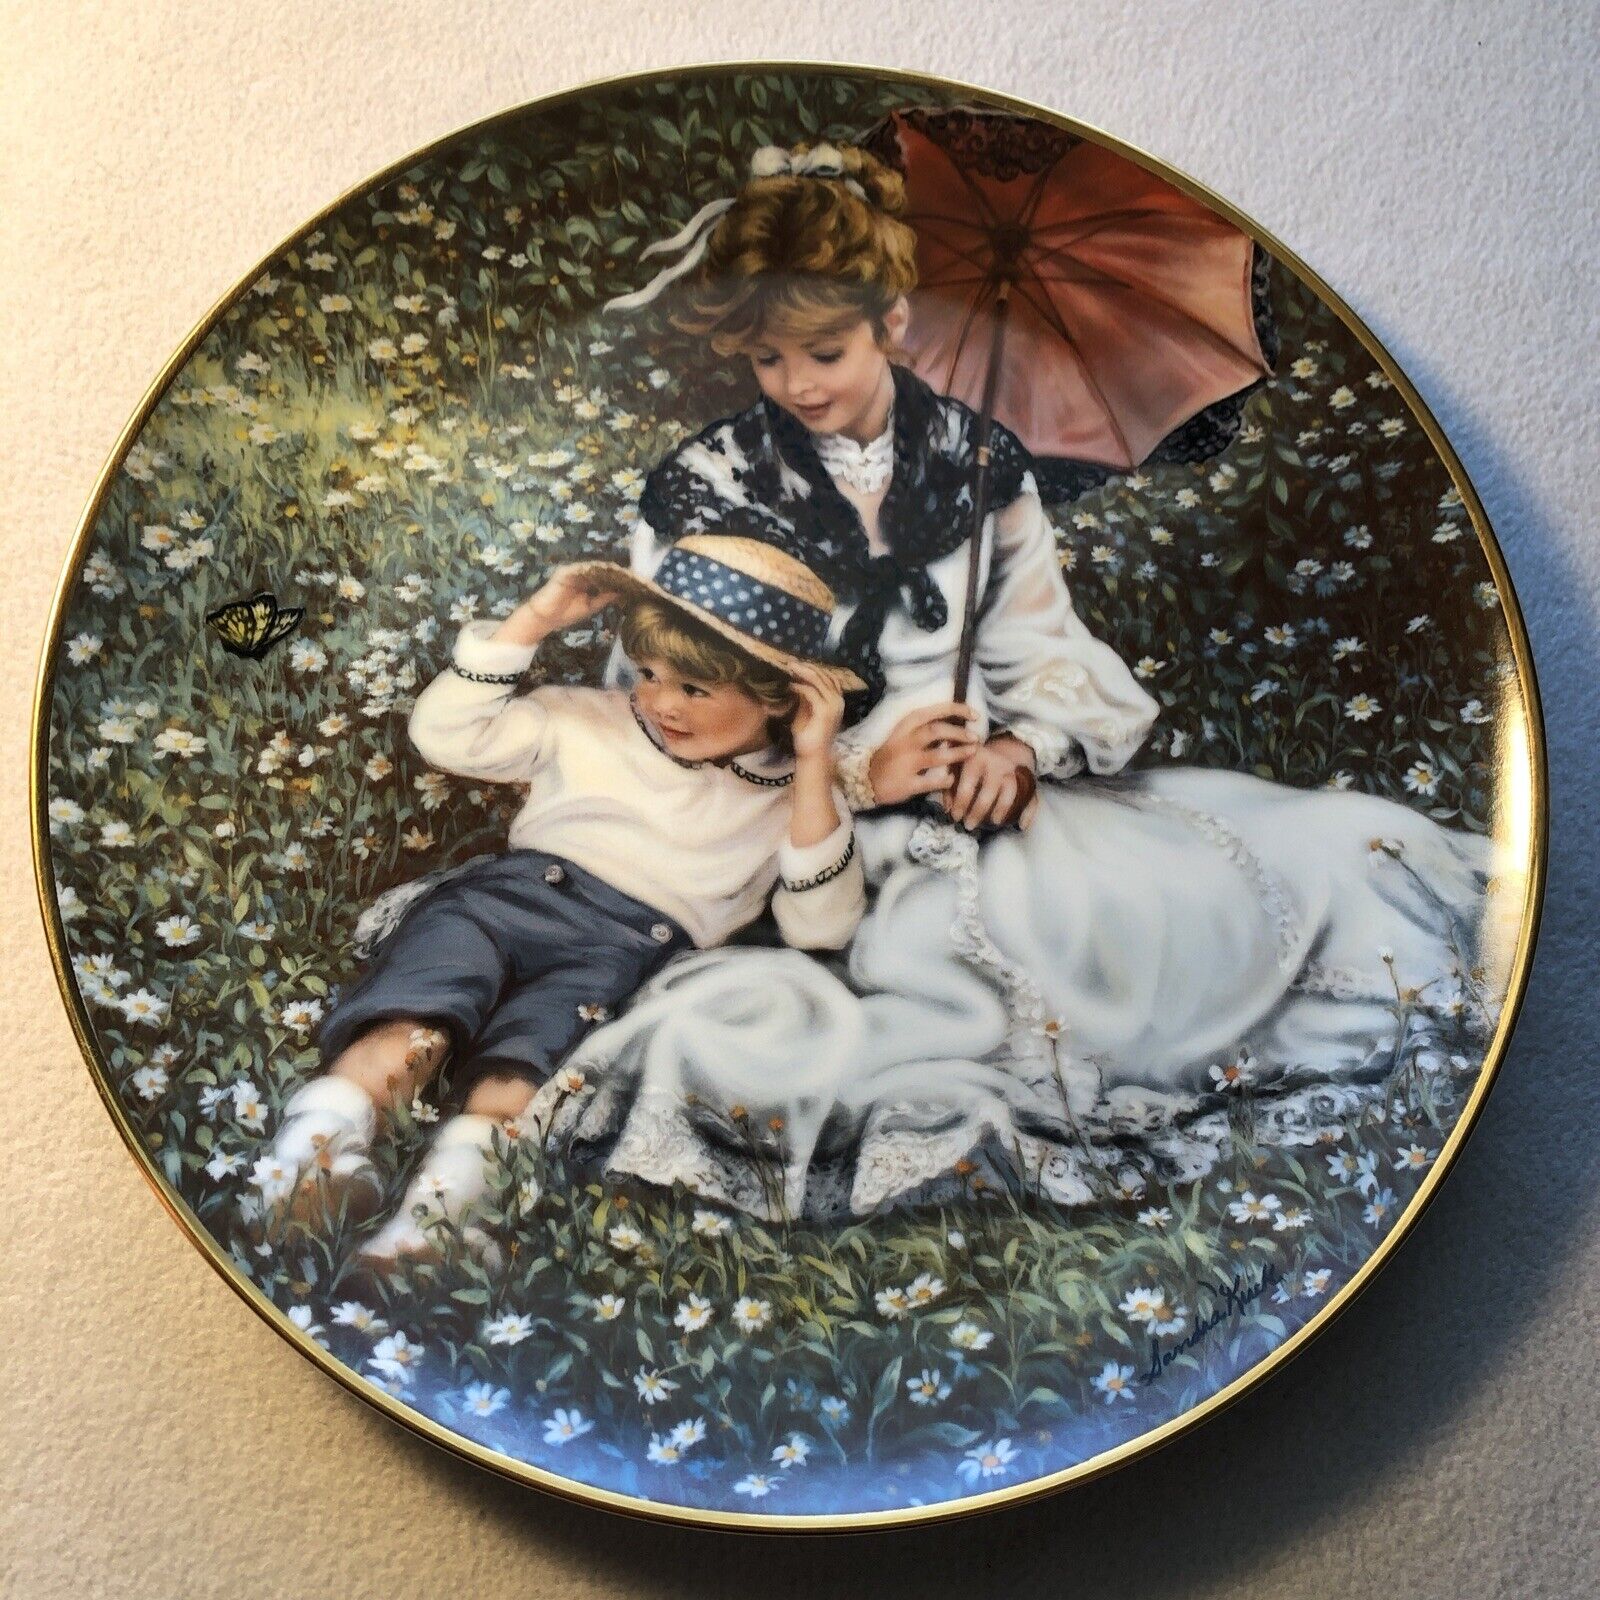 1988 Reco Sandra Kuck “A TIME TOGETHER” Collectible Plate 9 1/4”